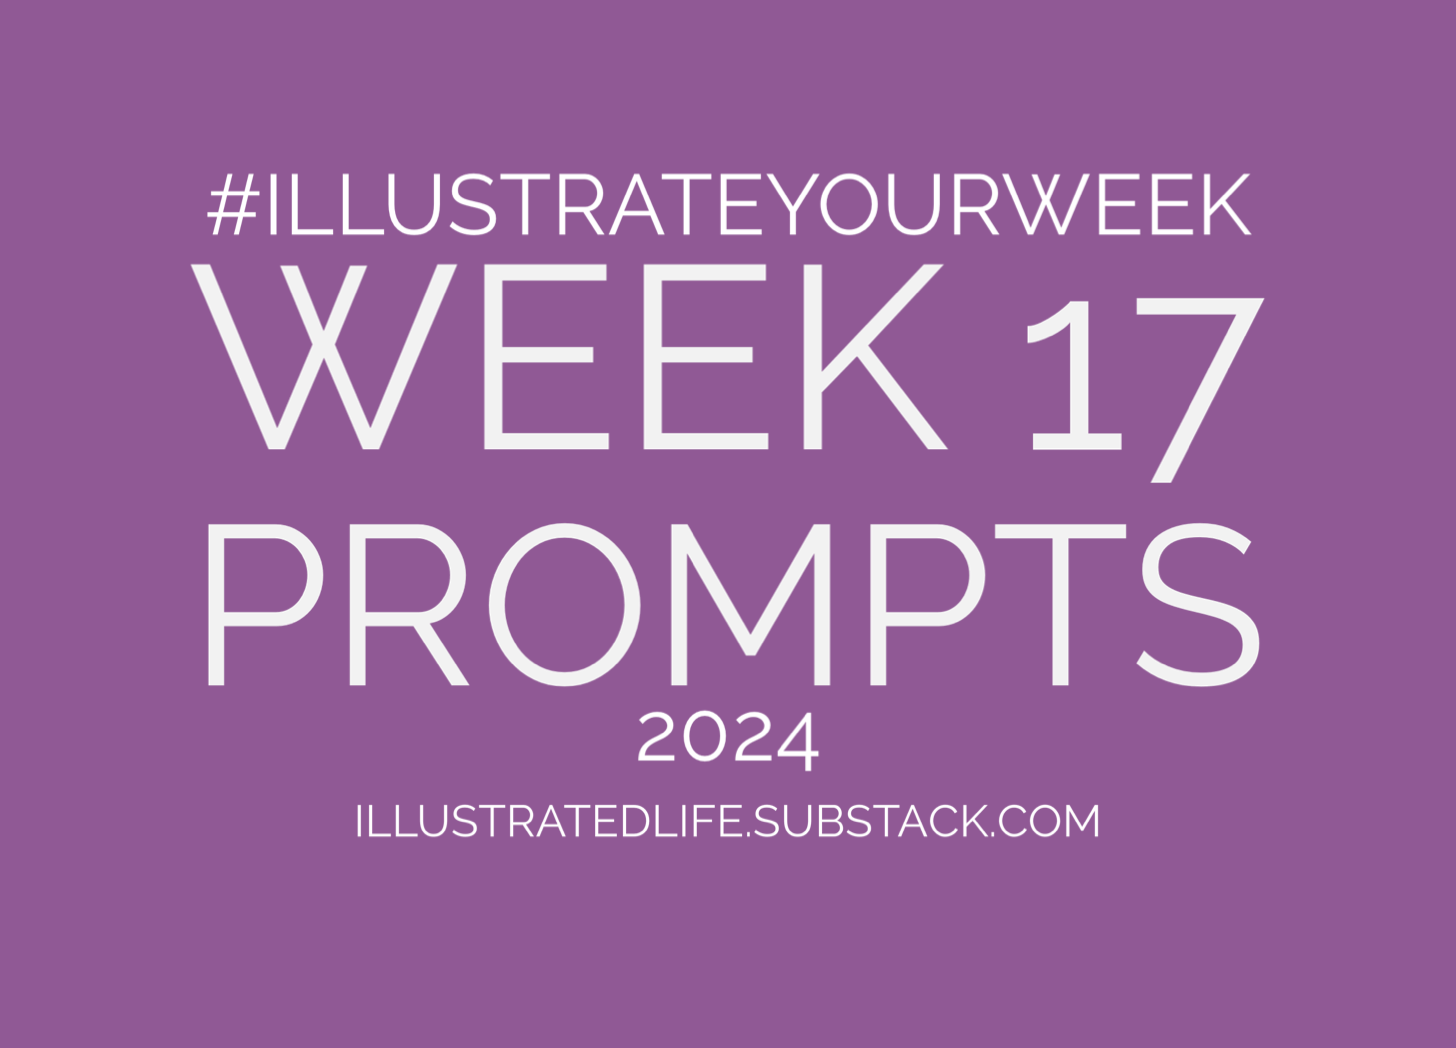 Illustrate Your Week Prompts for Week 17